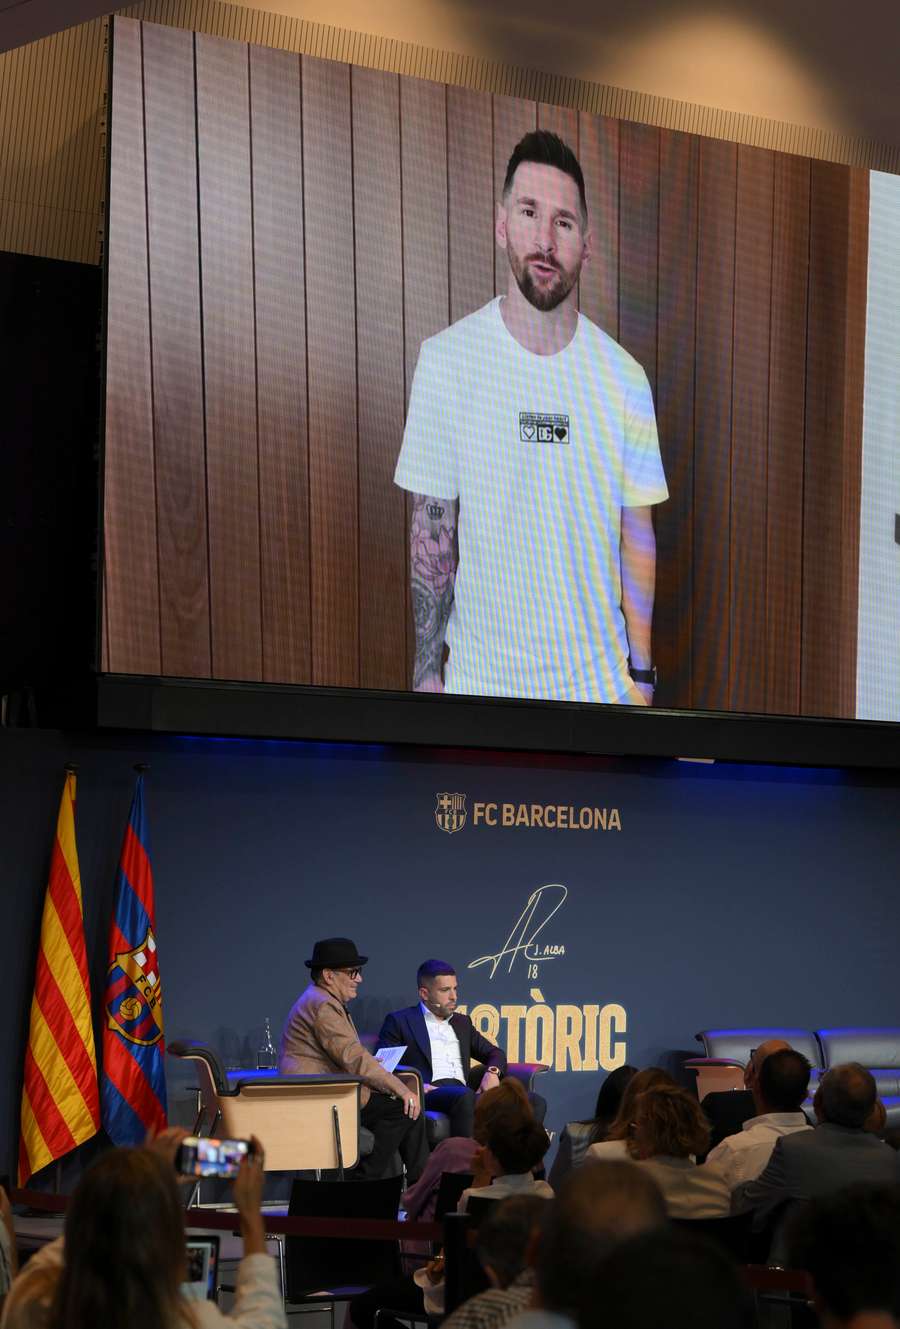 Barcelona's Spanish defender Jordi Alba, right, listens to a message from former Barcelona player Lionel Messi (on screen) during a farewell event at the Camp Nou